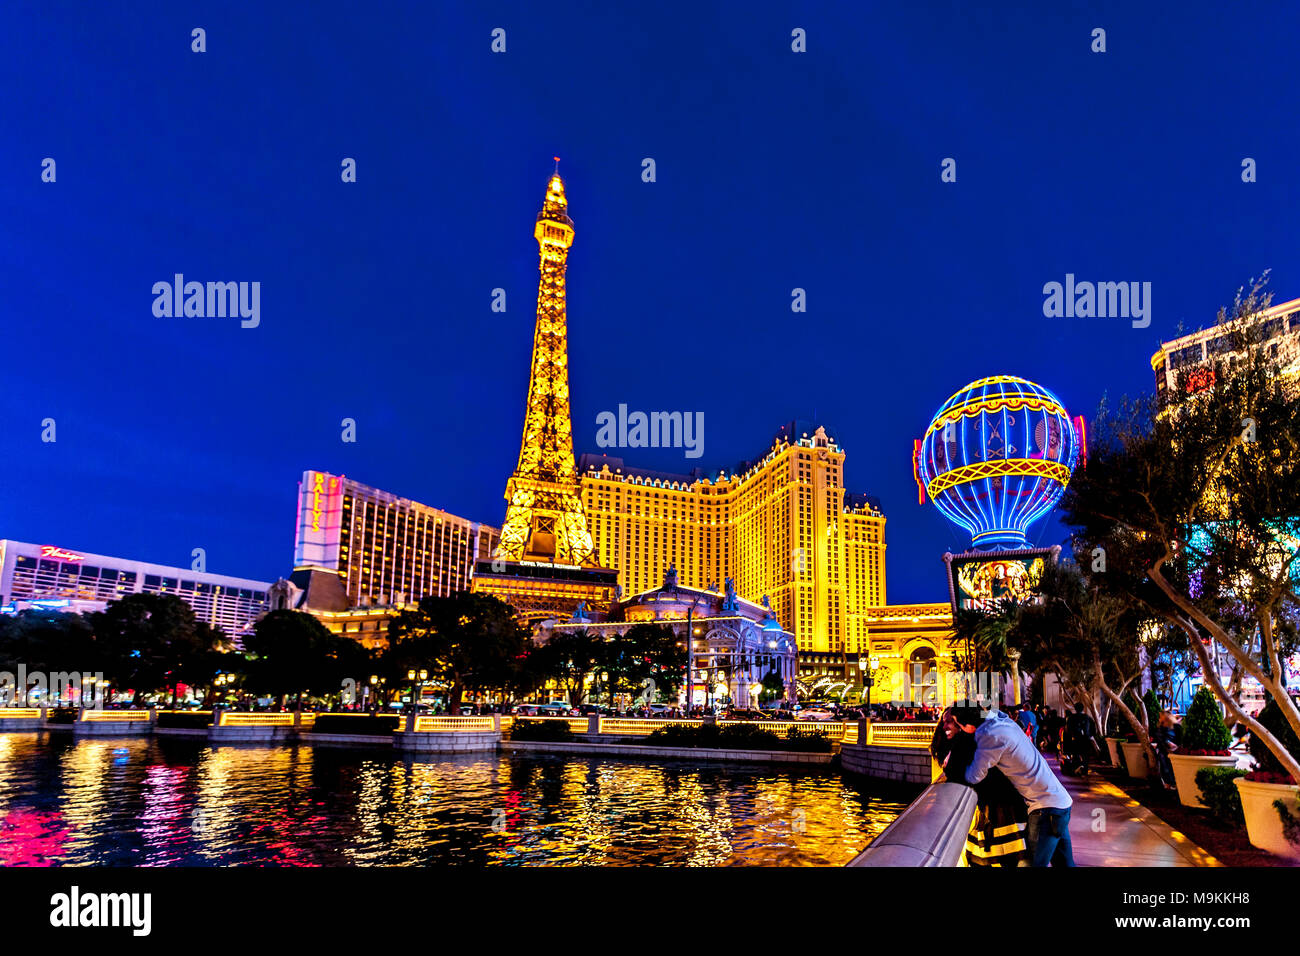 Eiffel Tower Experience in Las Vegas - Rise Above the Strip - Go